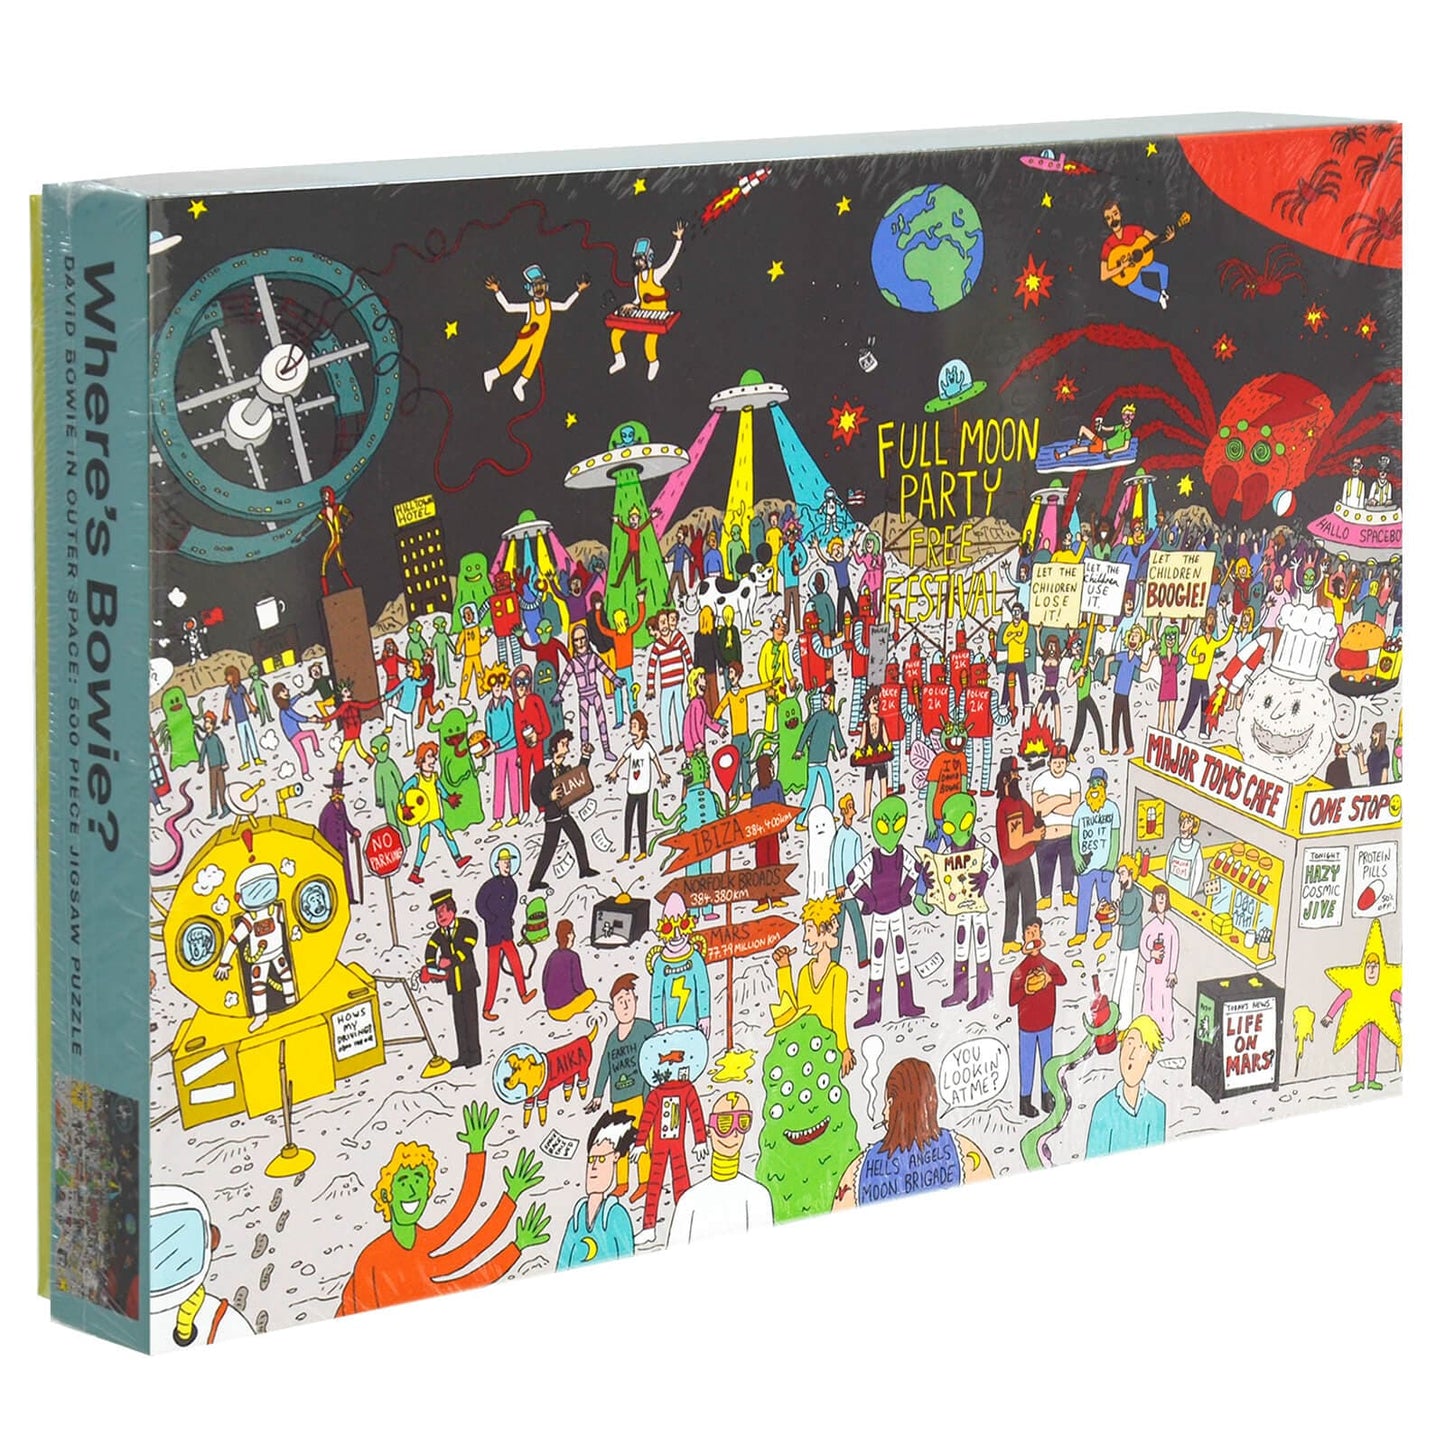 Where's Bowie? David Bowie in Outer Space 500 Piece Jigsaw Puzzle Sold by Board Hoarders